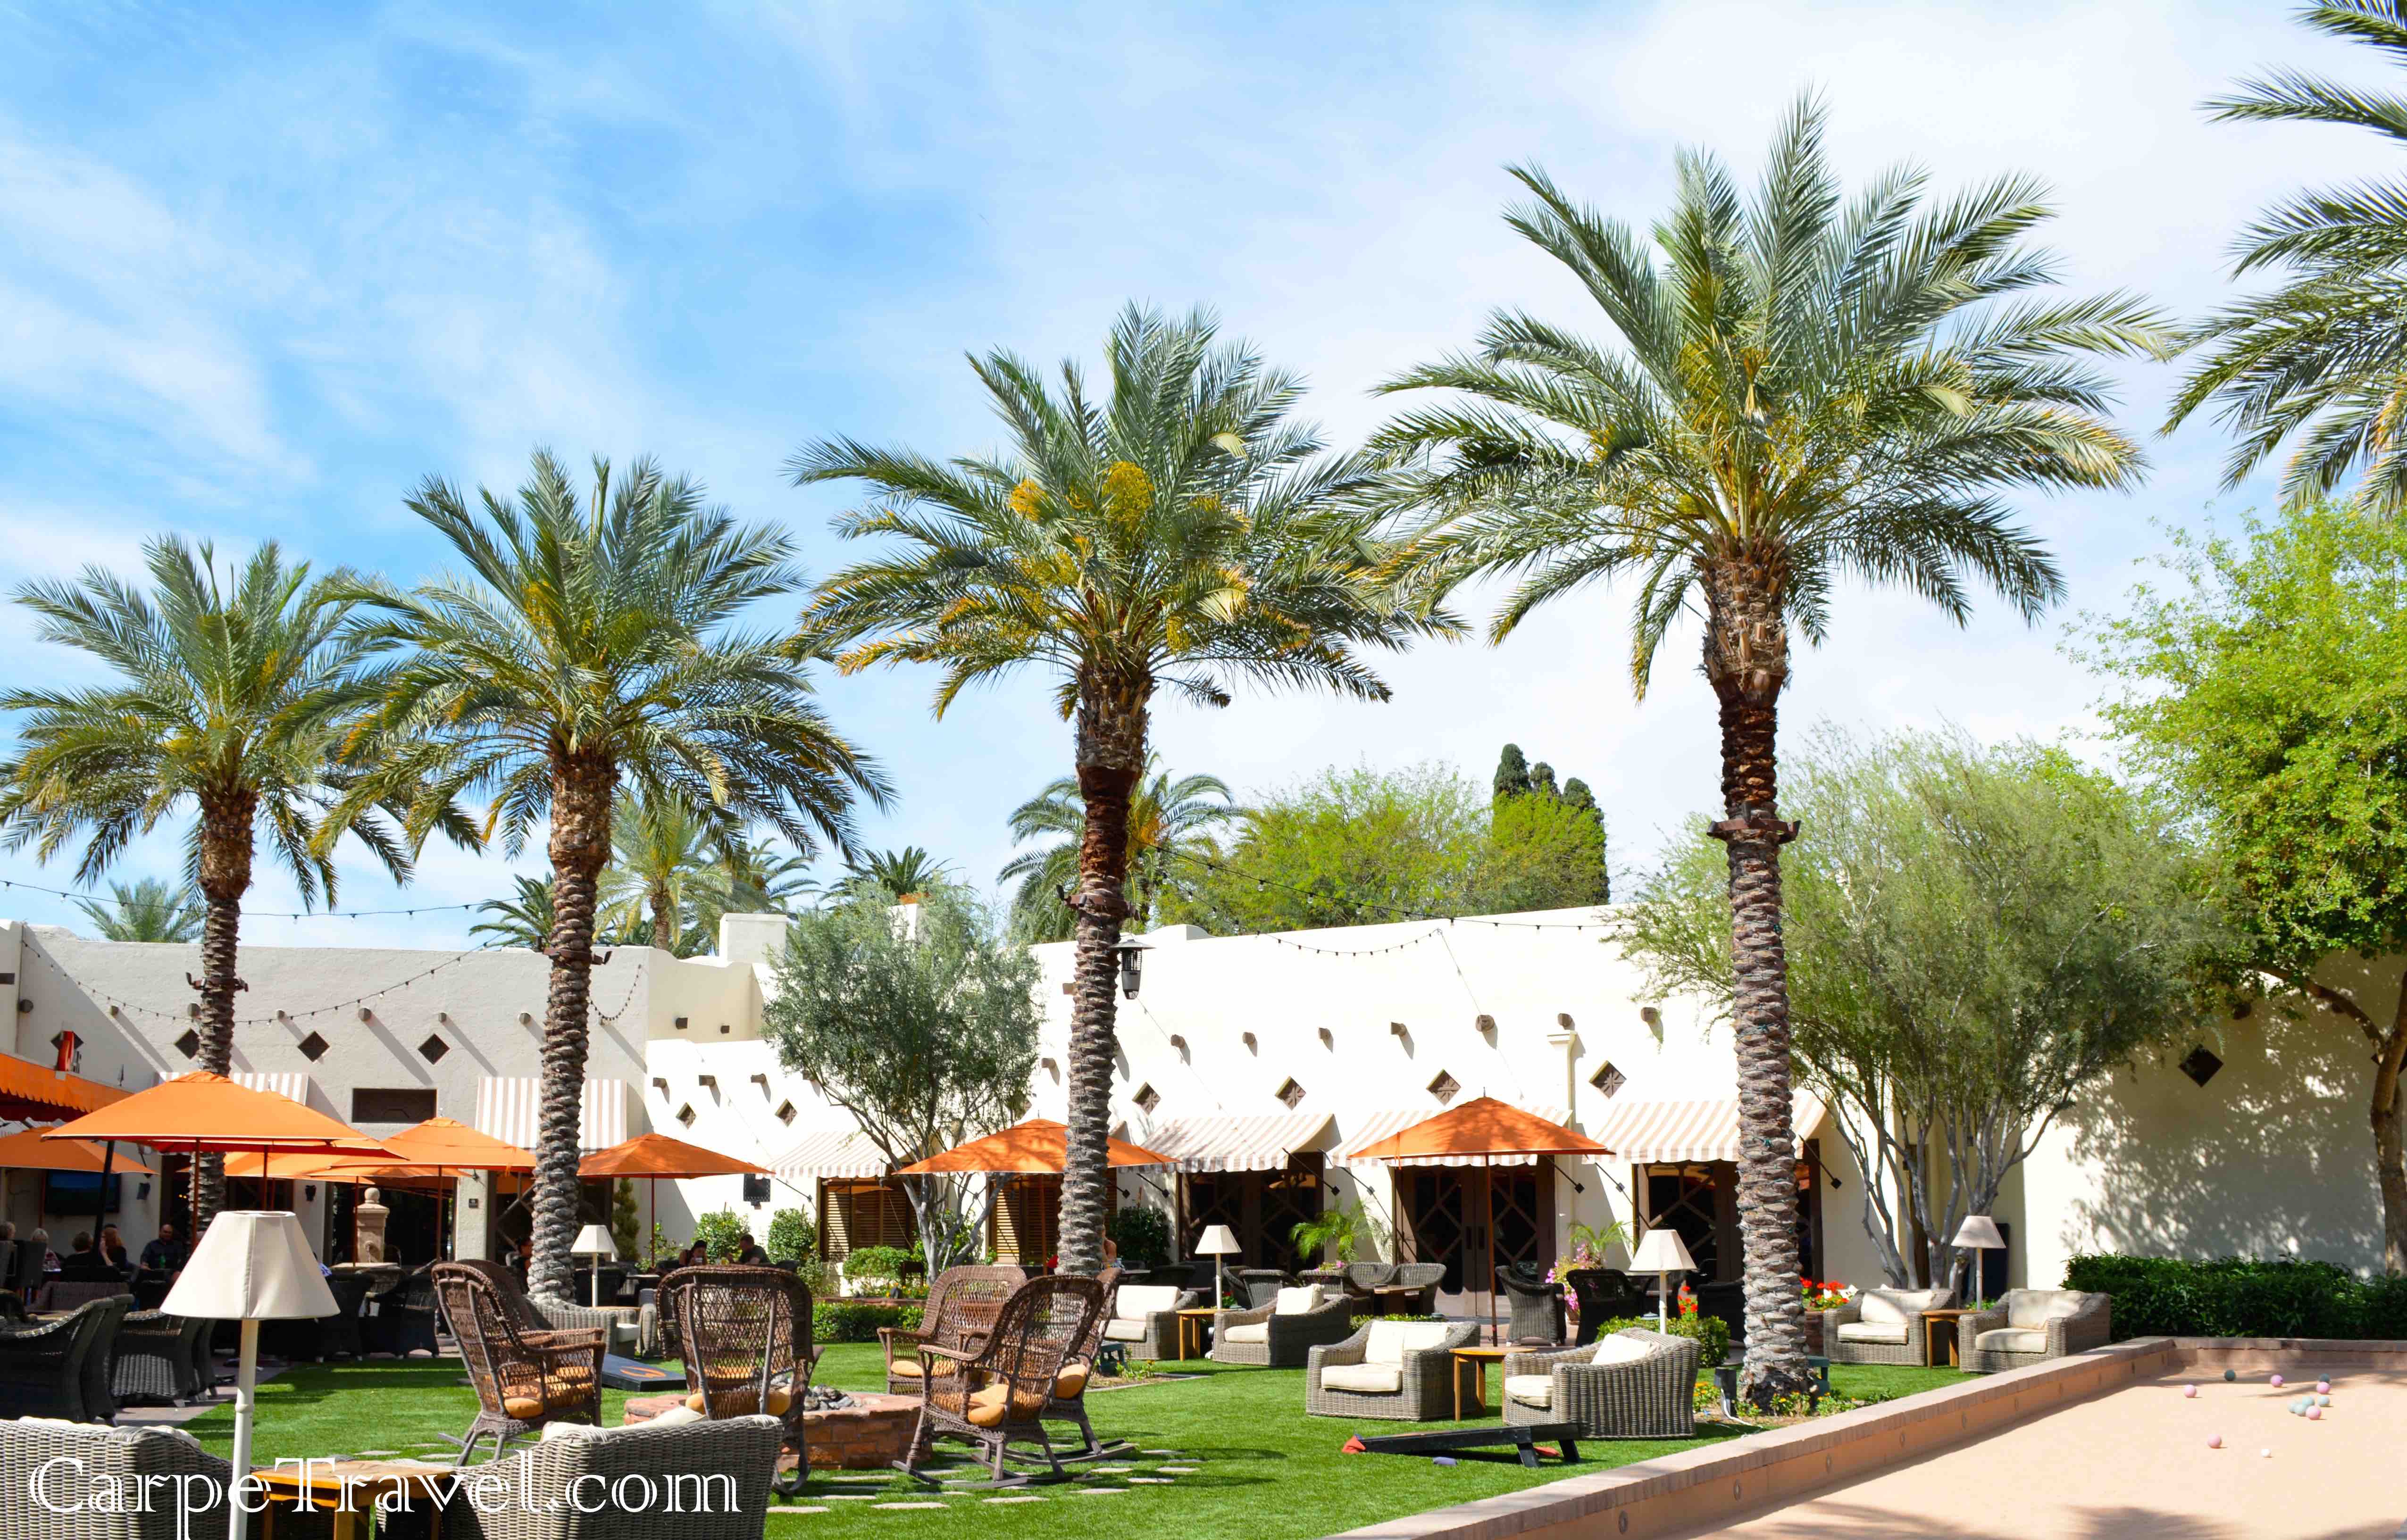 The Wigwam Resort is one of the best family resorts in the Phoenix area.